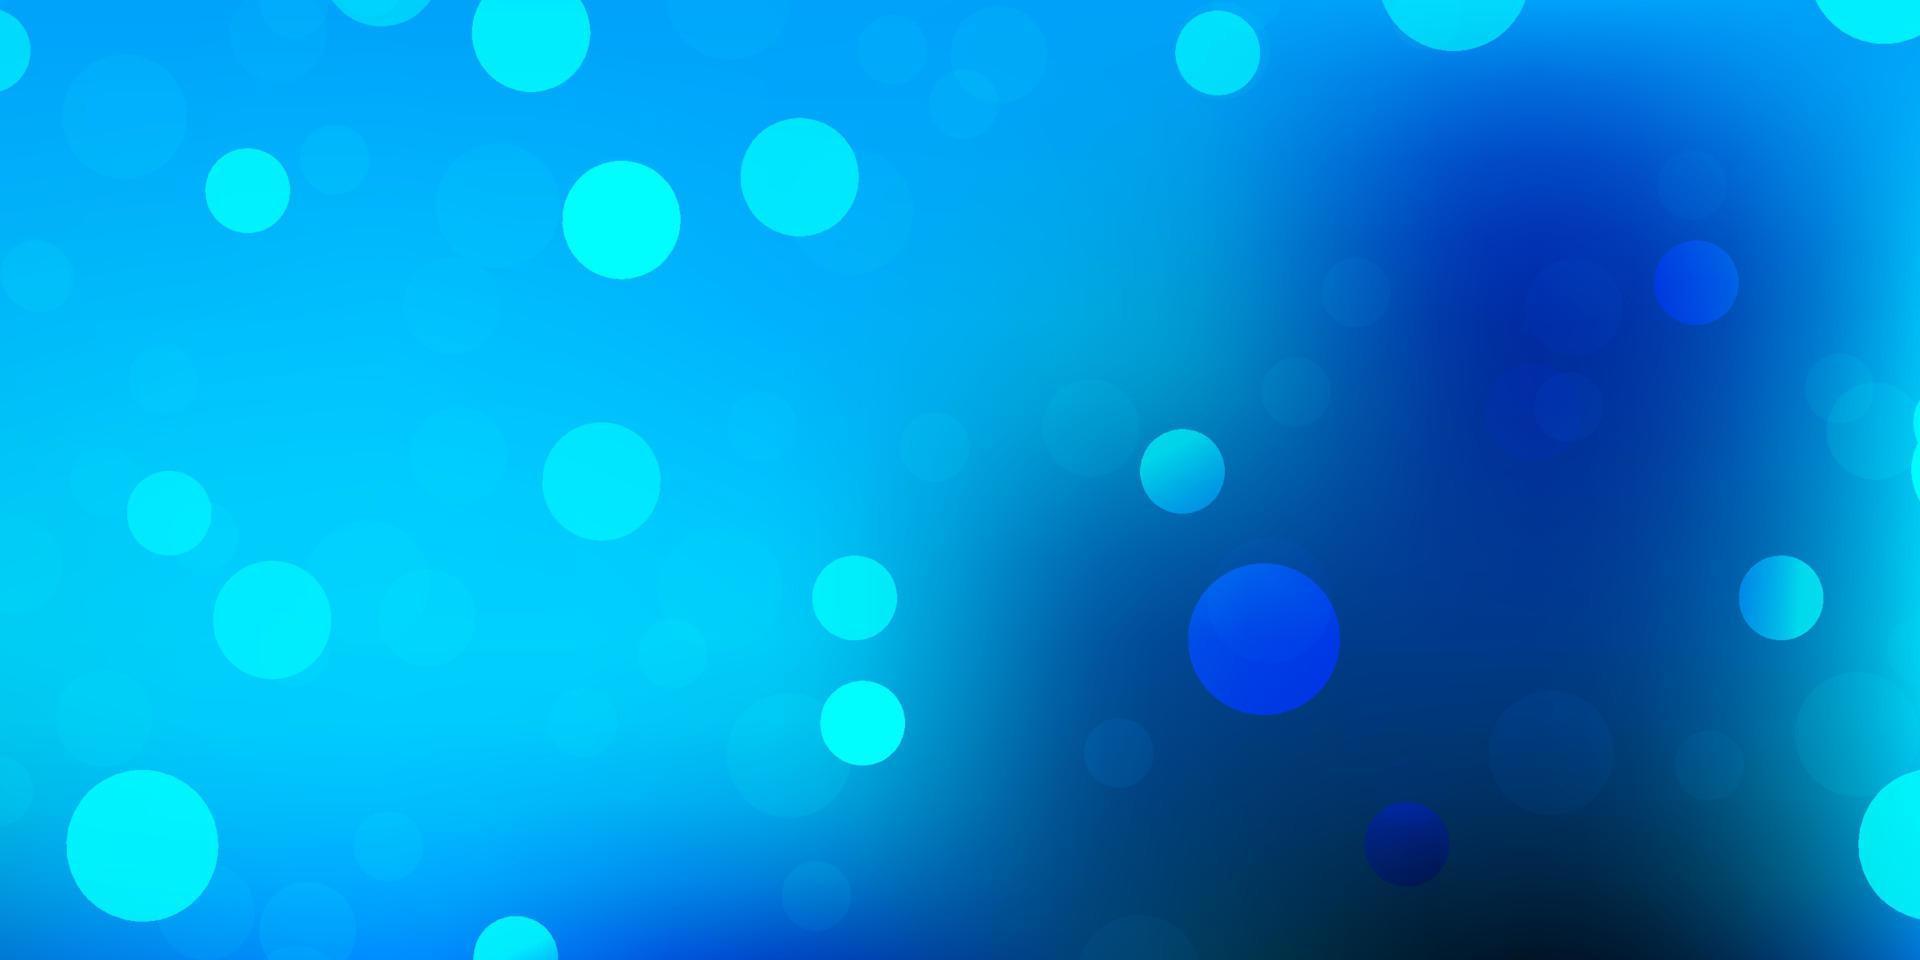 Light blue vector backdrop with chaotic shapes.